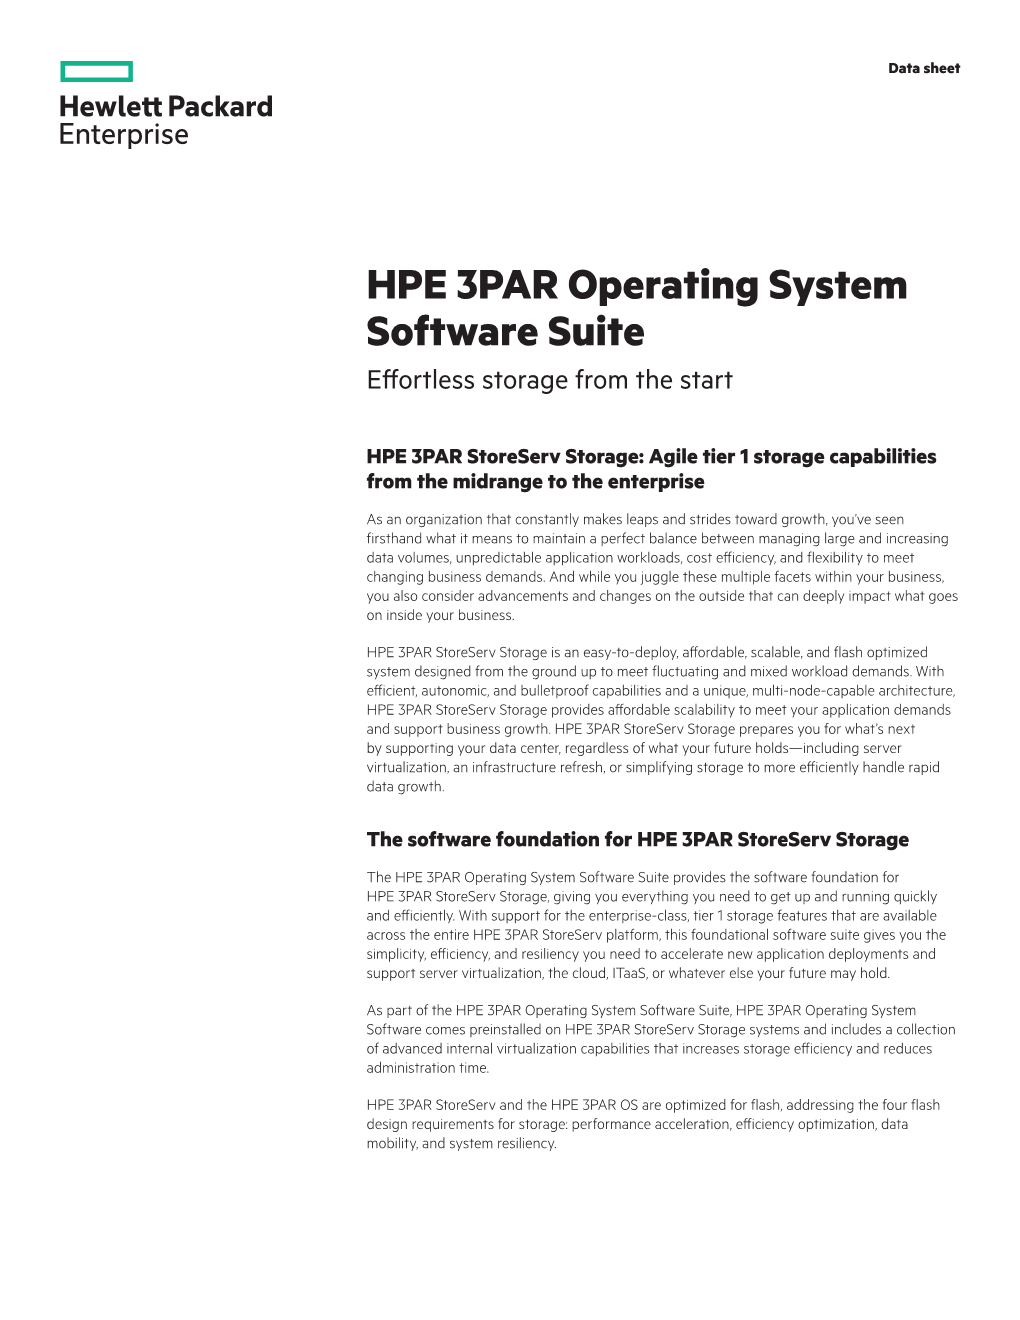 HPE 3PAR Operating System Software Suite Effortless Storage from the Start